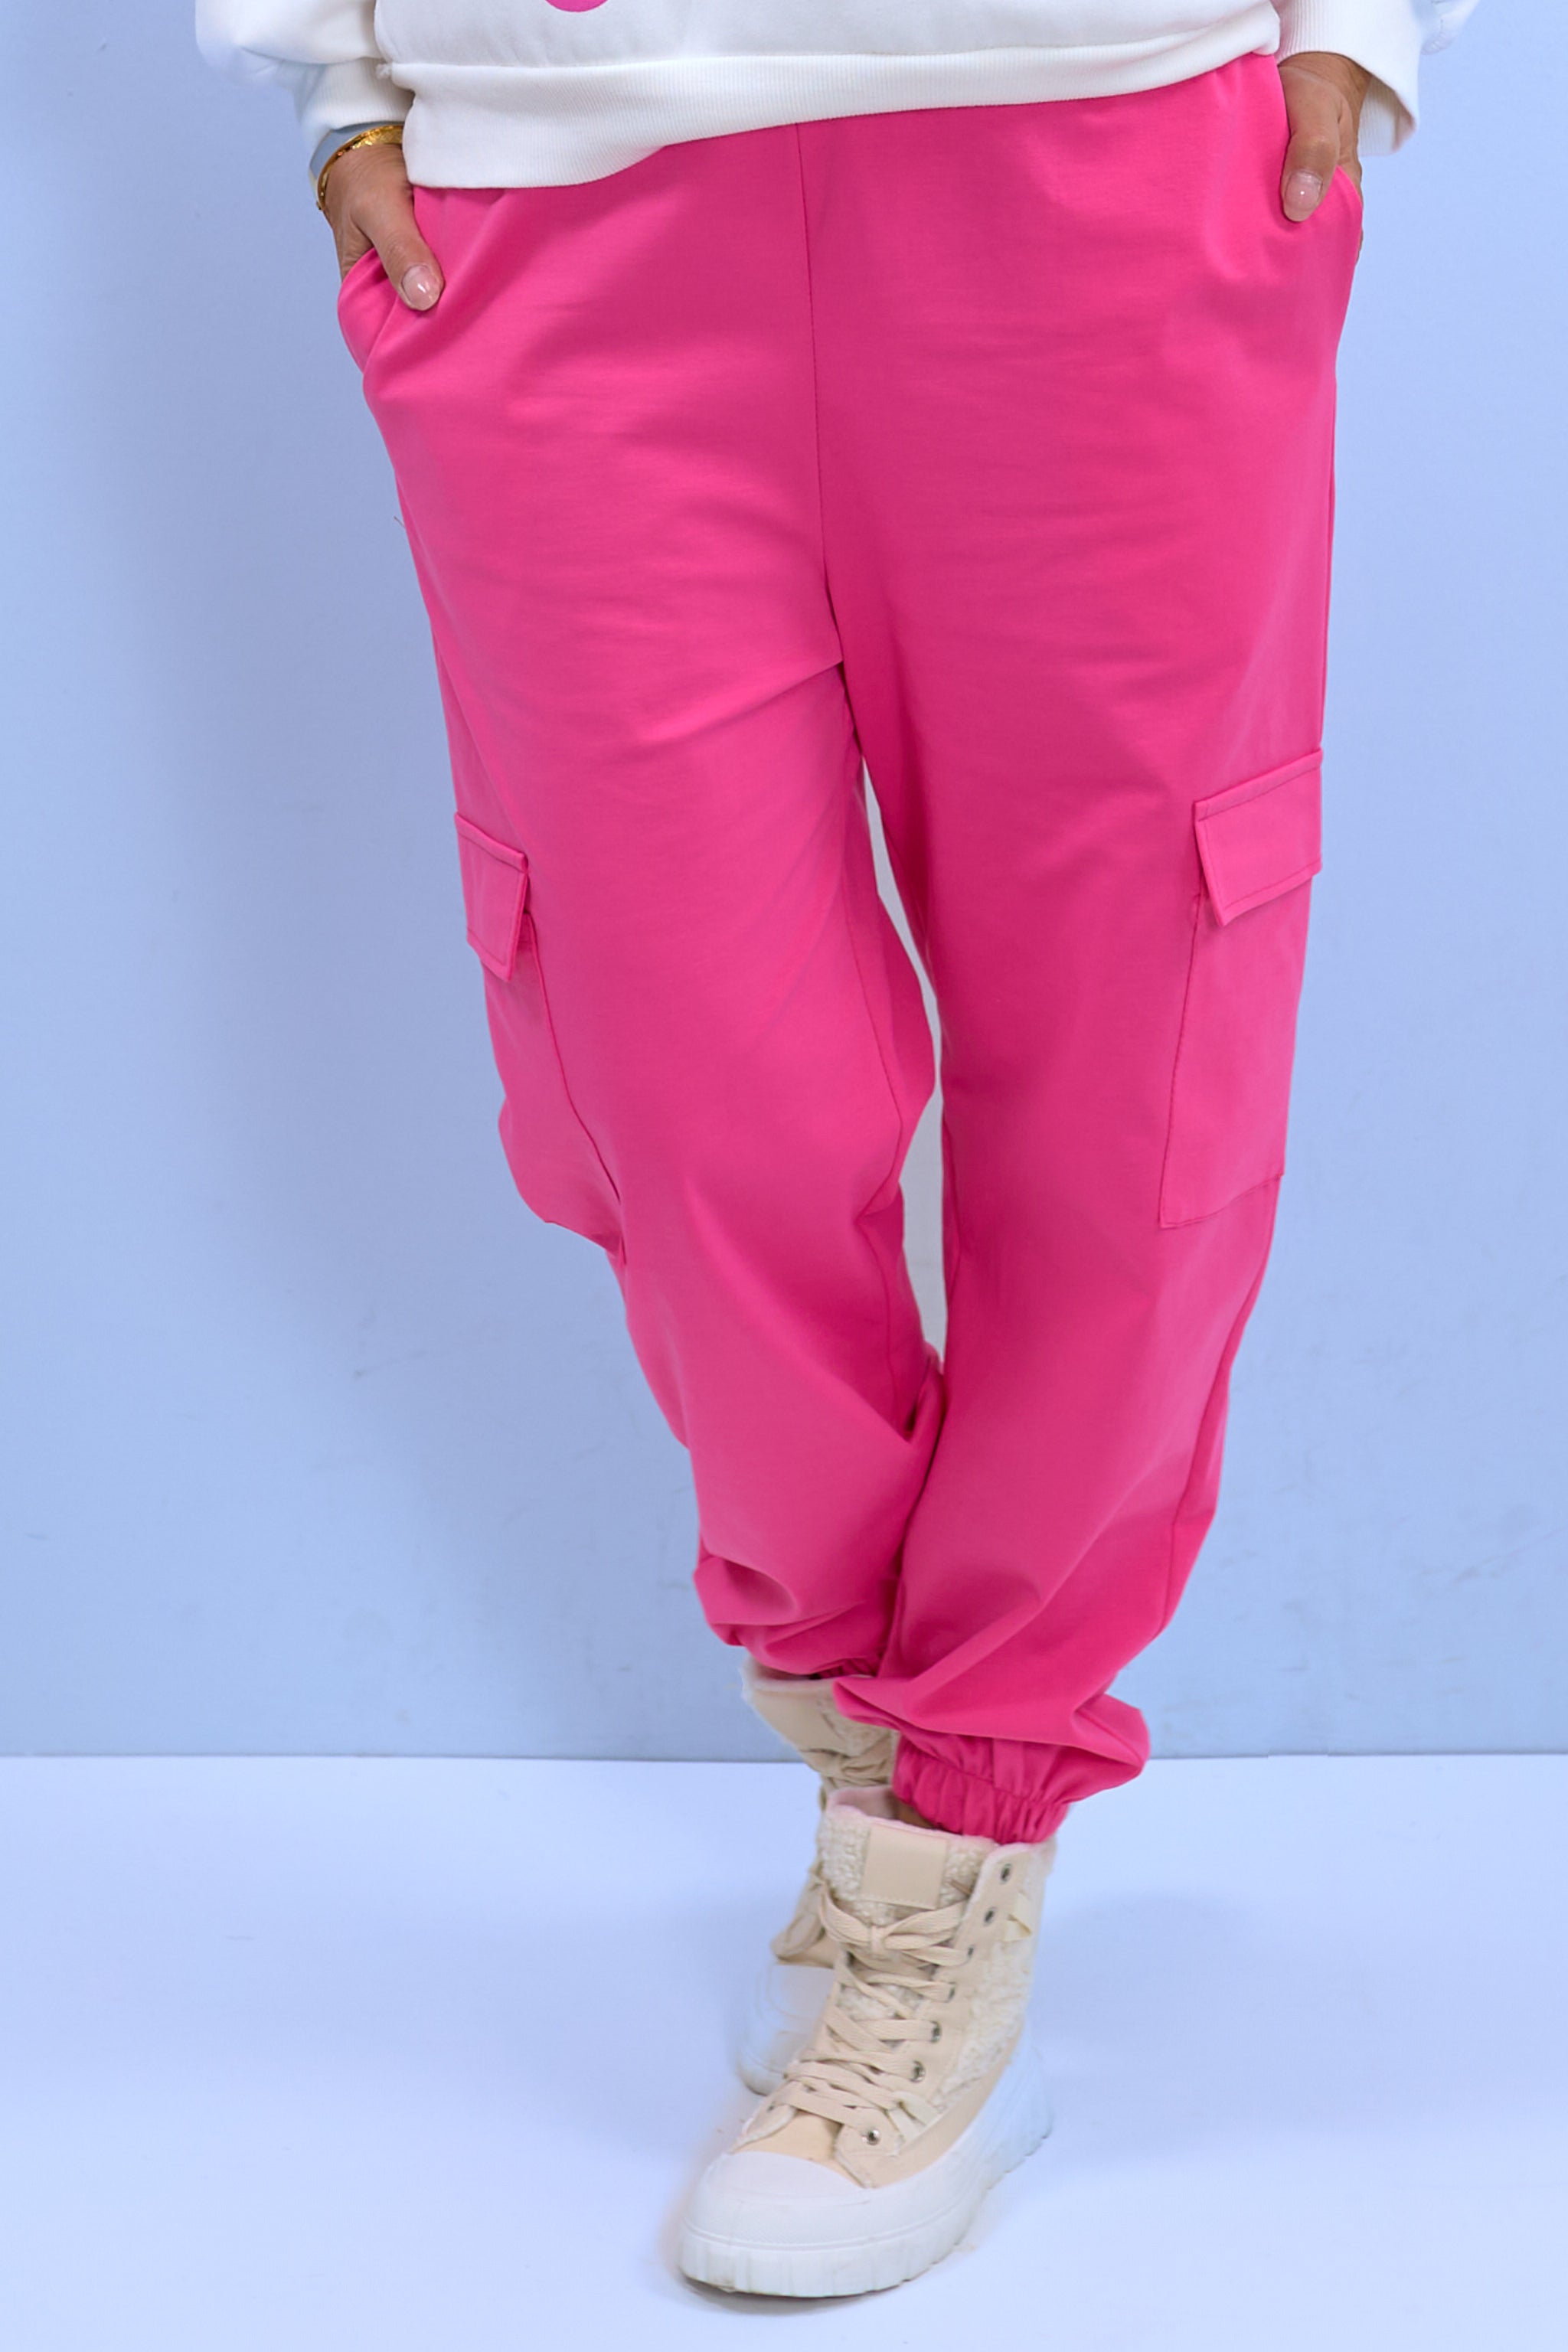 Cargo style pants, pink